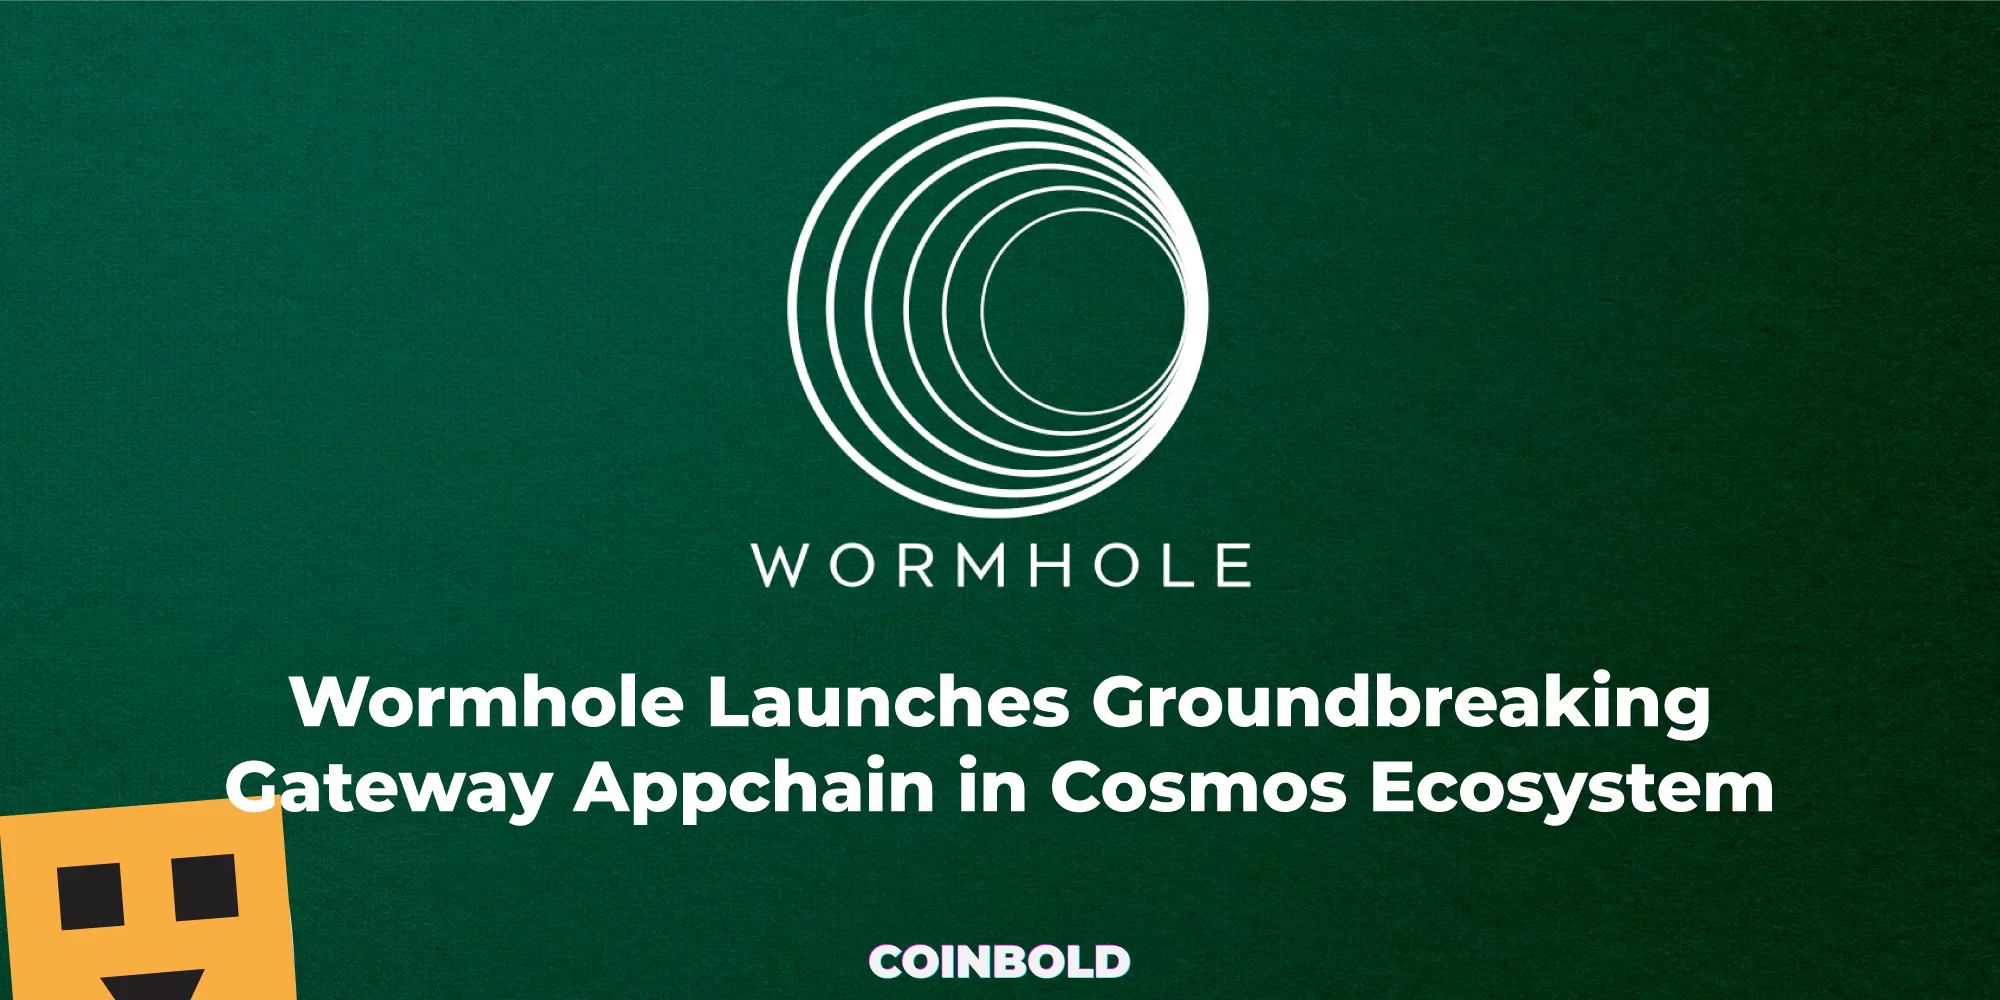 Wormhole Launches Groundbreaking Gateway Appchain in Cosmos Ecosystem